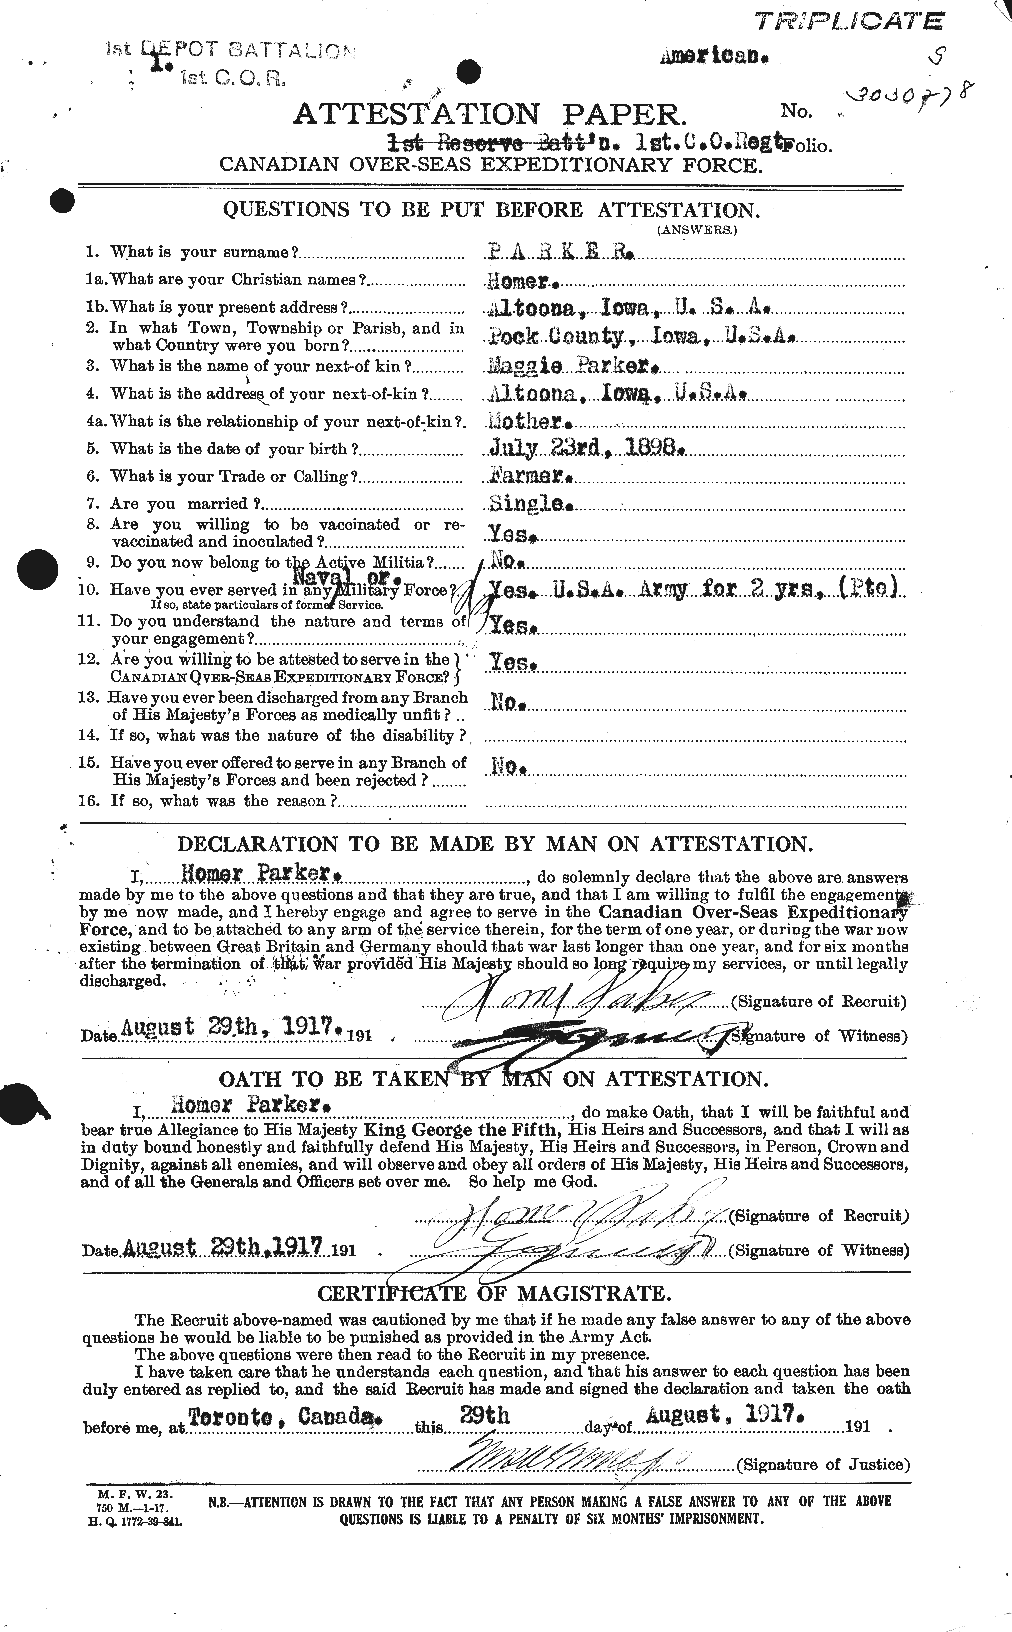 Personnel Records of the First World War - CEF 565380a